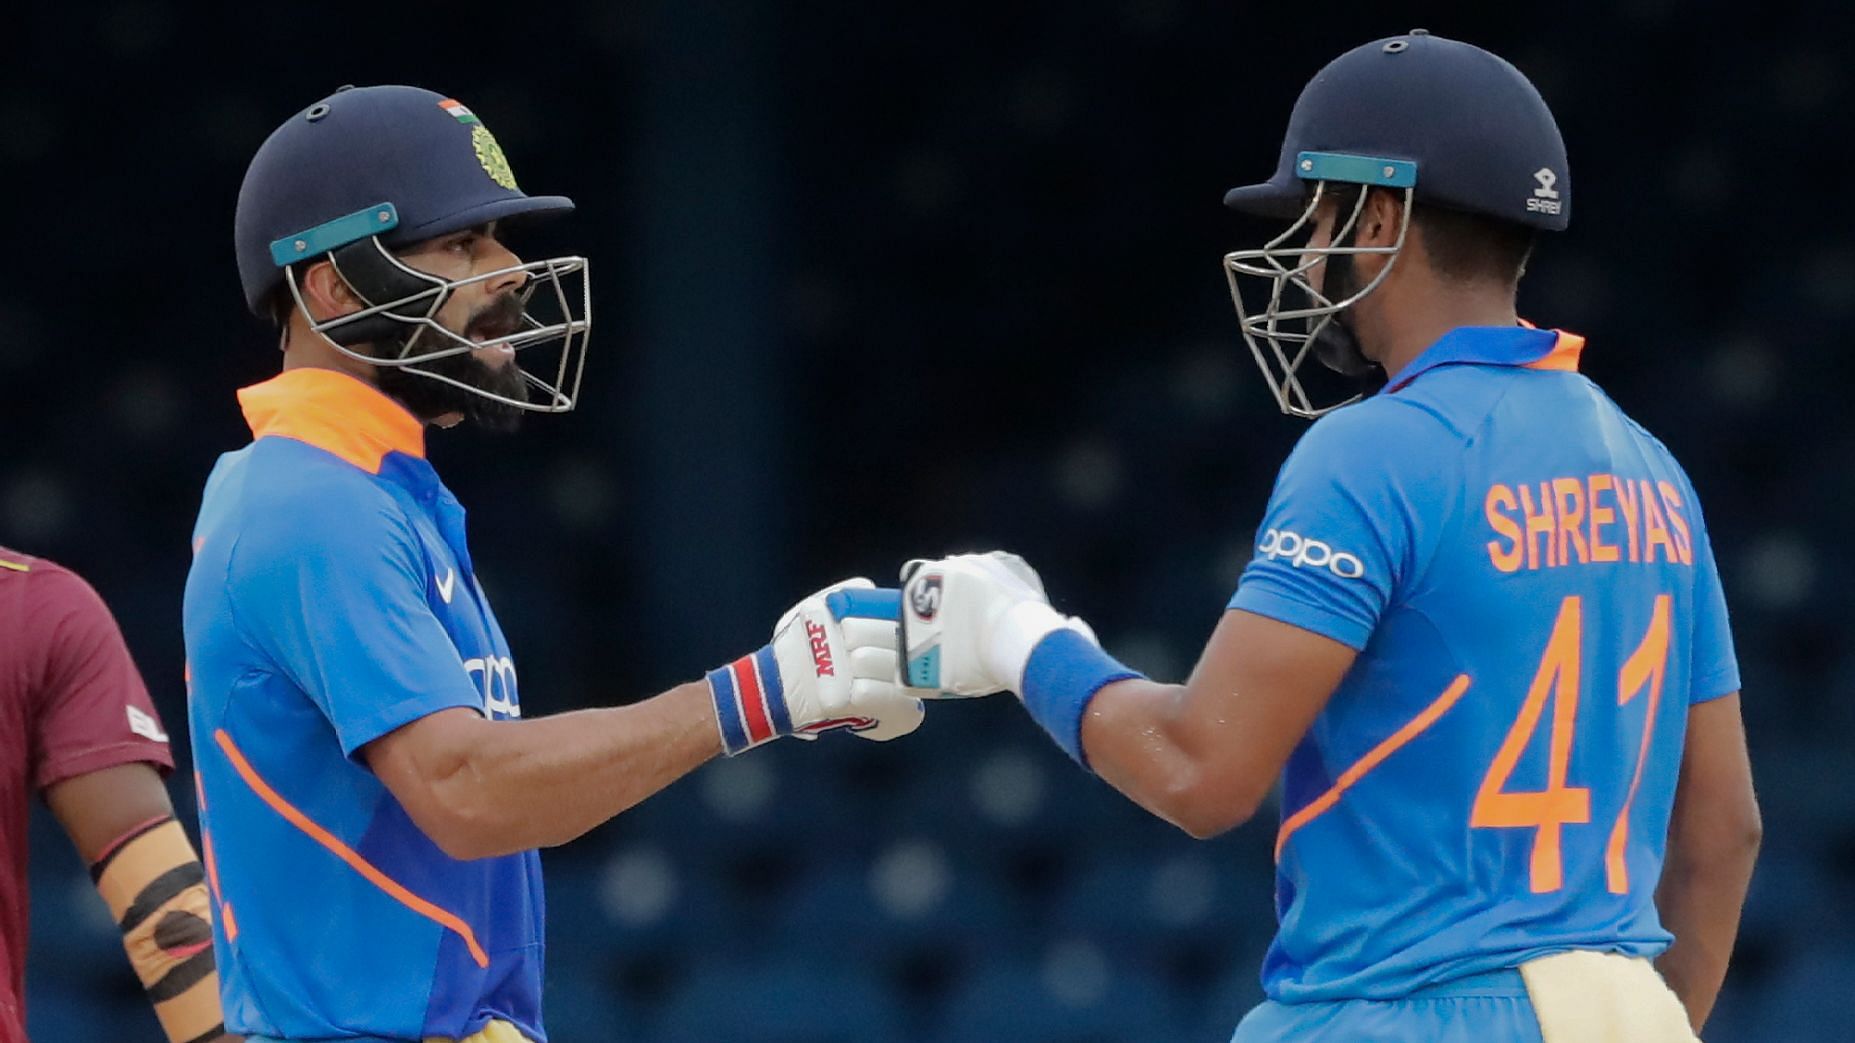 Virat Kohli (left) and Shreyas Iyer put on back-to-back century stands of 125 and 120 in the 2nd and the 3rd ODI respectively.